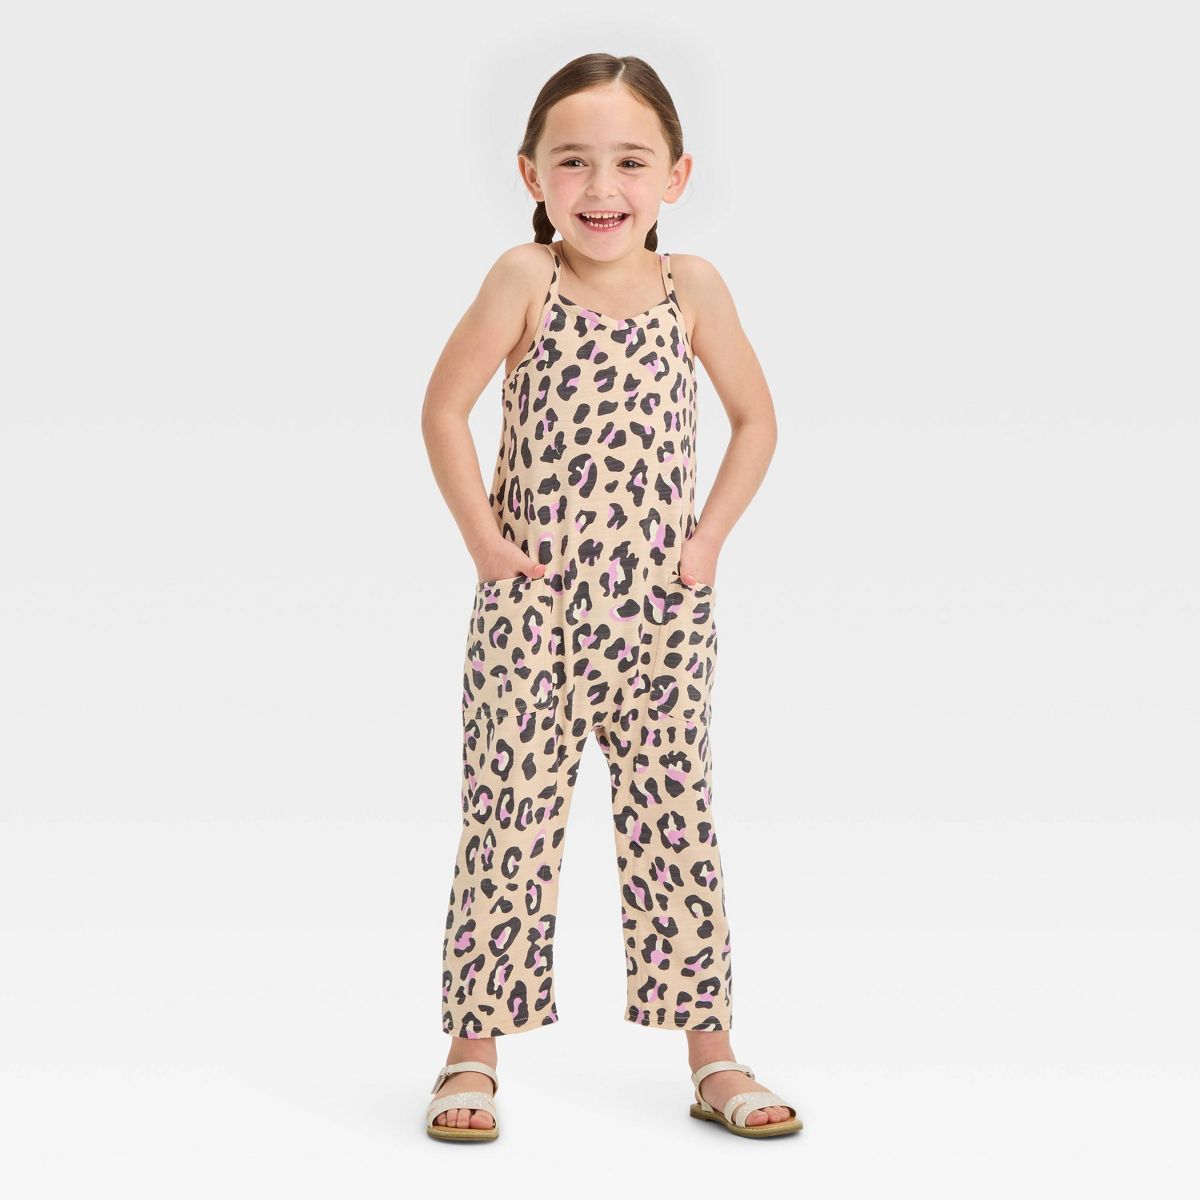 Grayson Mini Toddler Girls' French Terry Knit Leopard Printed Jumpsuit - Beige | Target